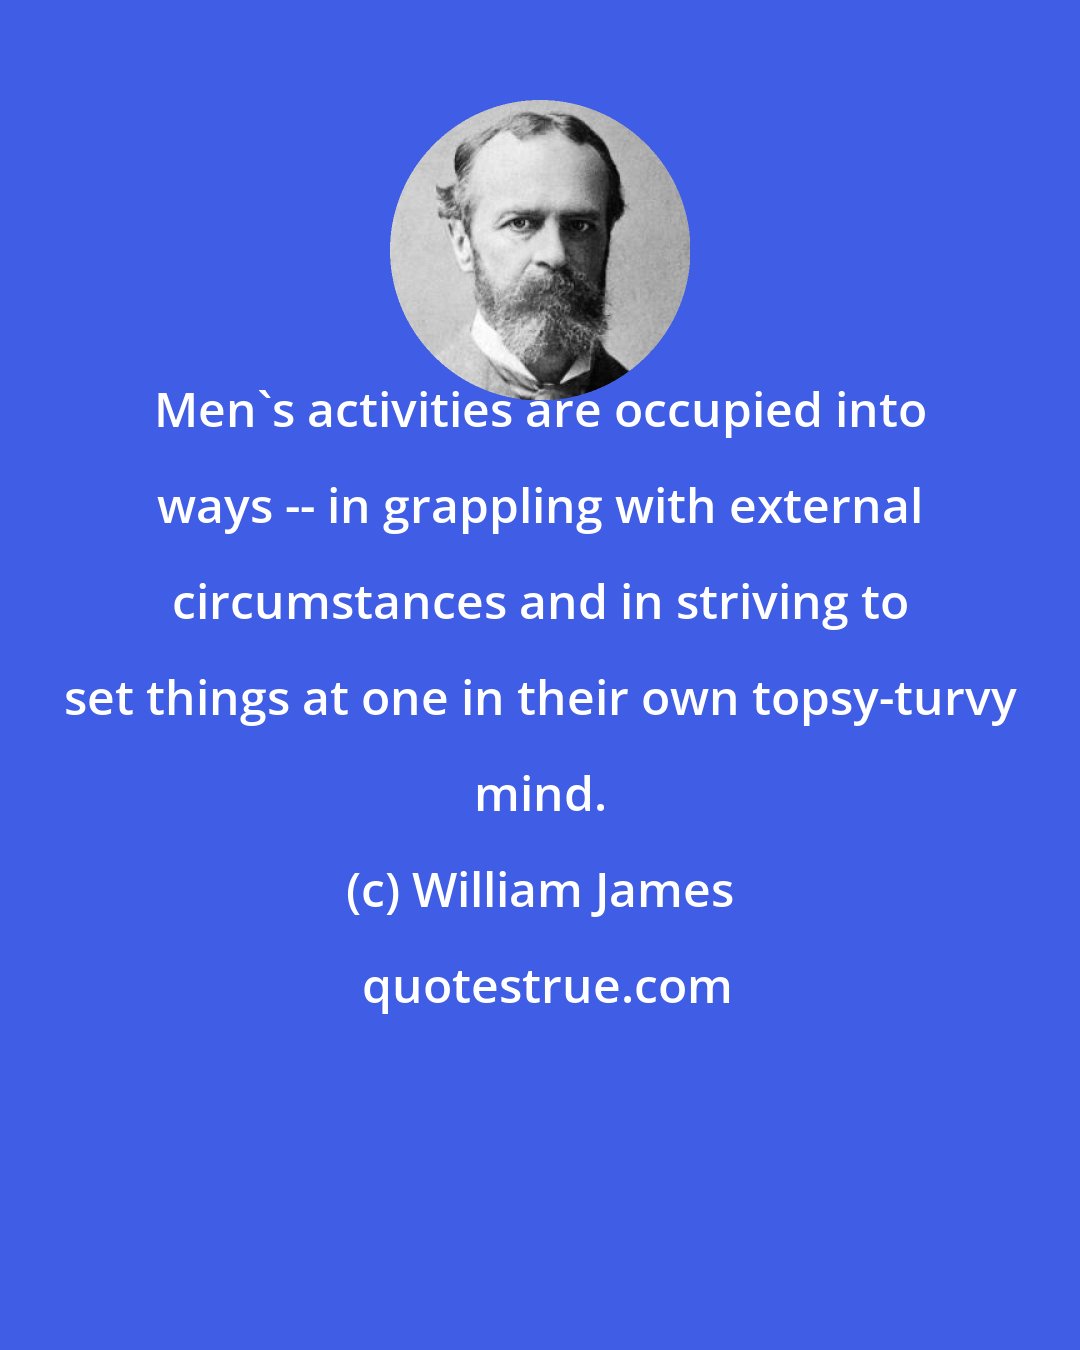 William James: Men's activities are occupied into ways -- in grappling with external circumstances and in striving to set things at one in their own topsy-turvy mind.